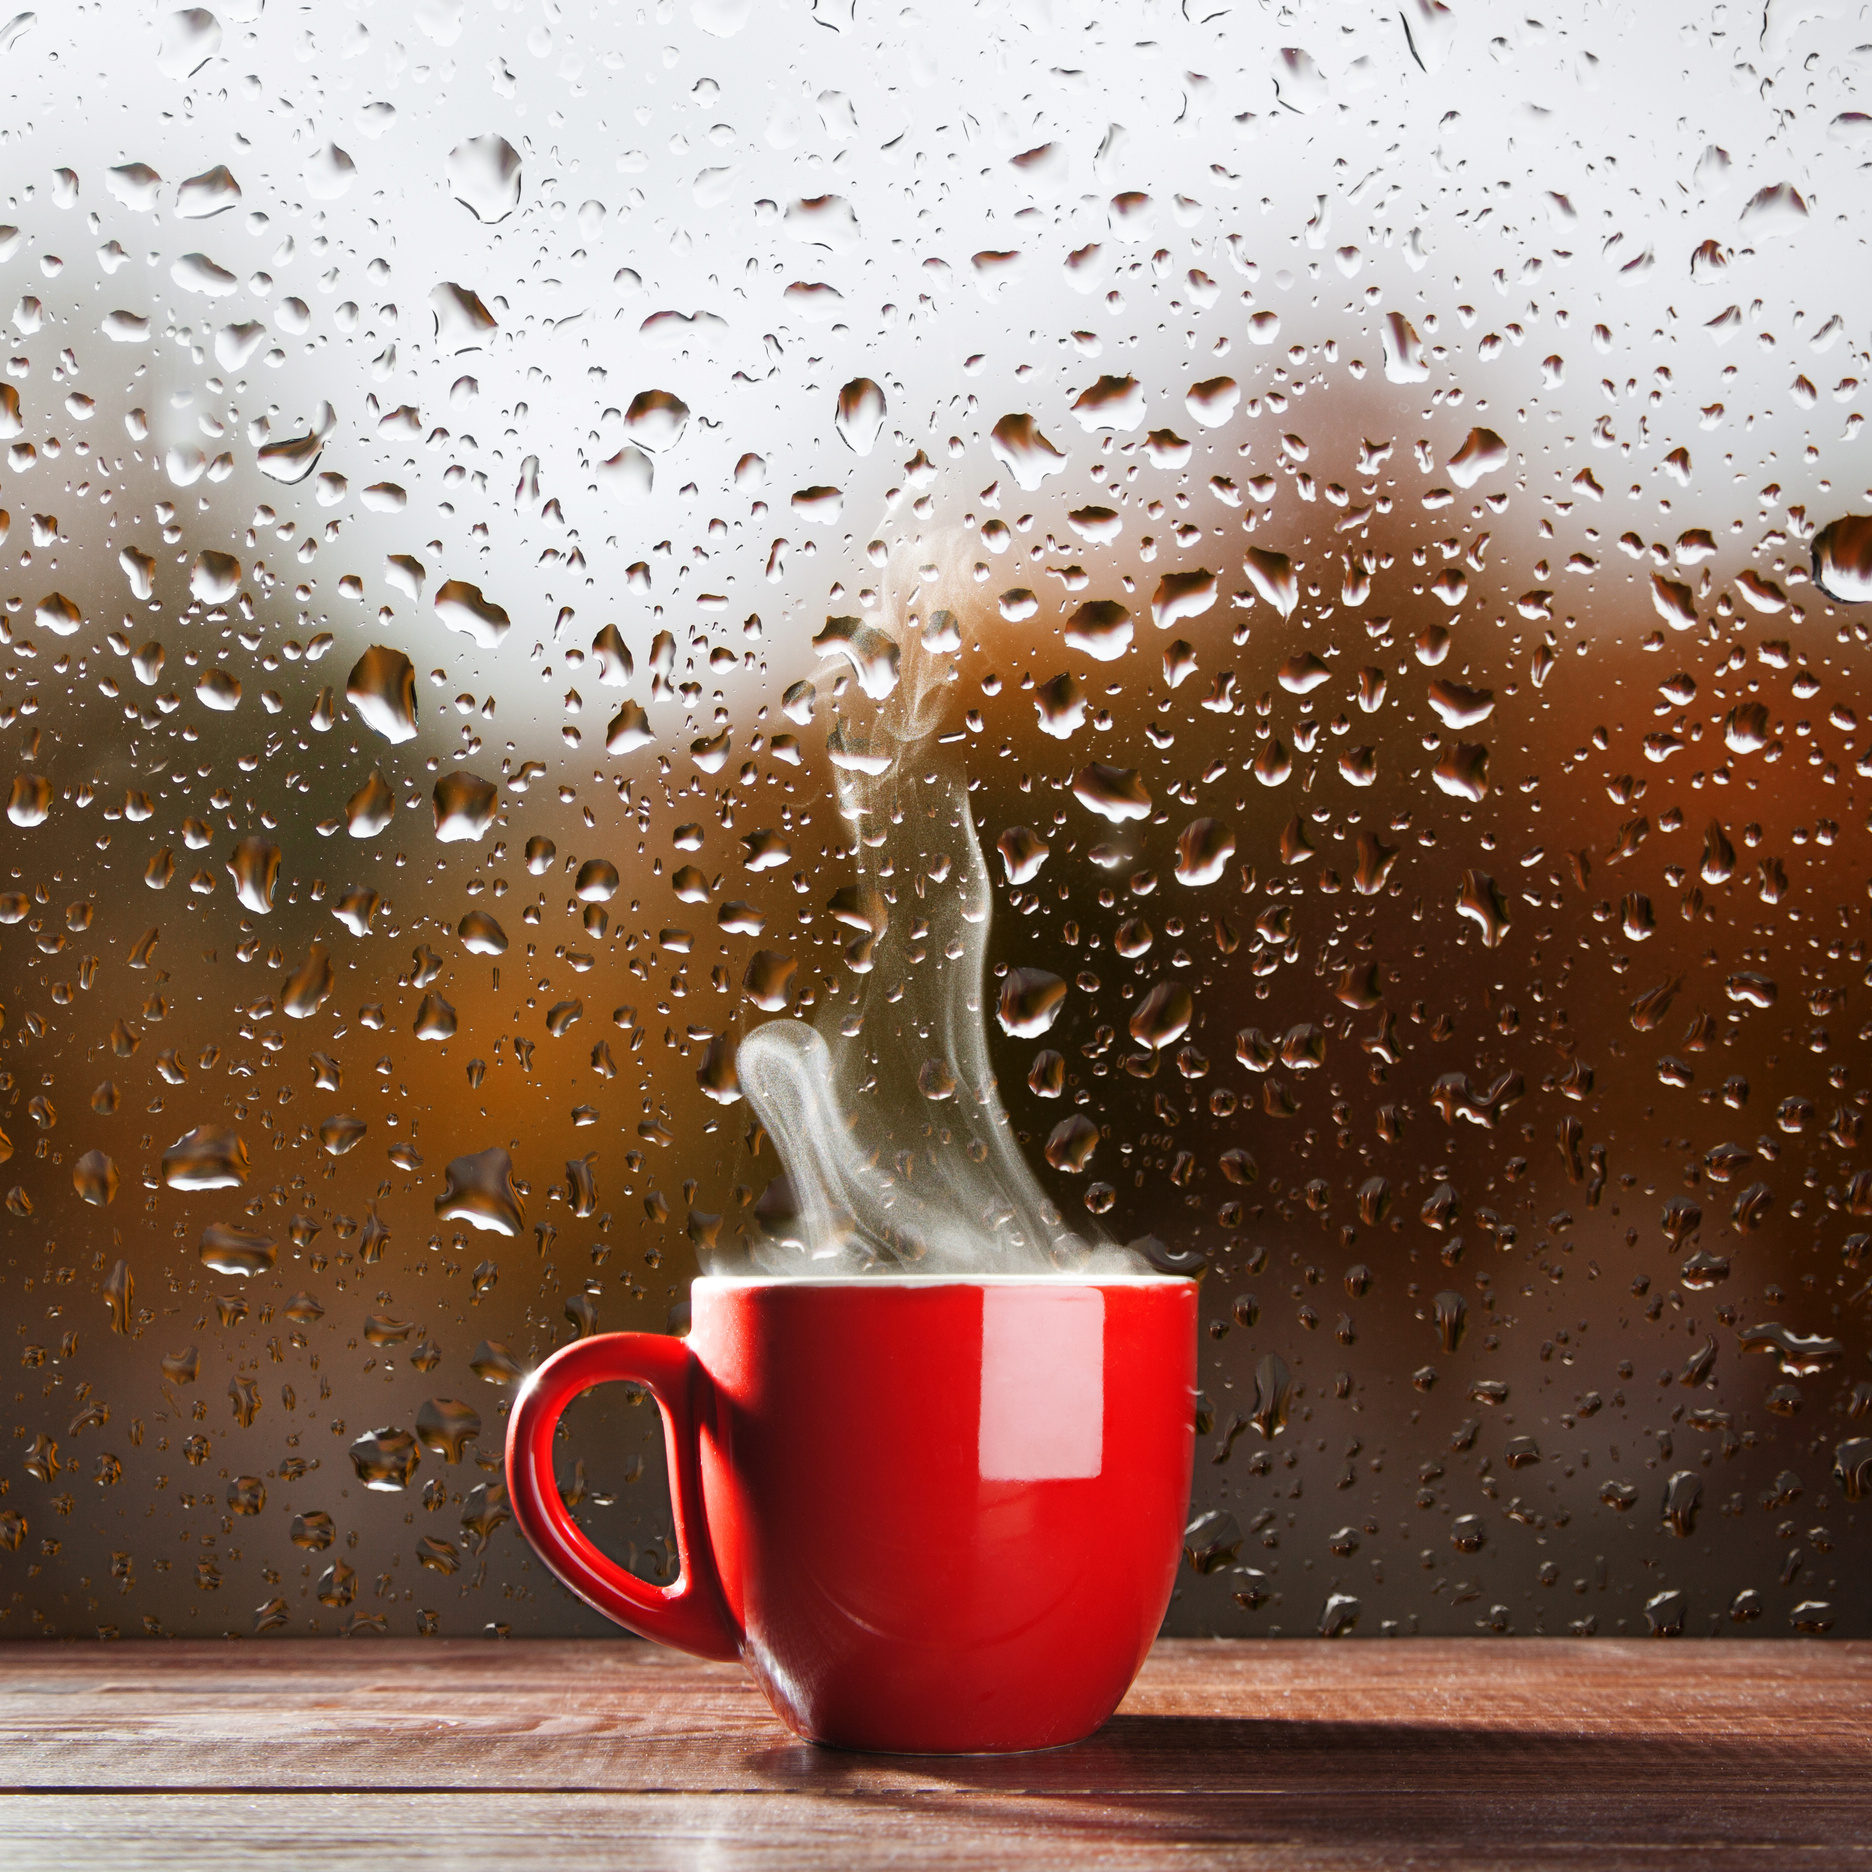 Cup of Coffee on a Rainy Day